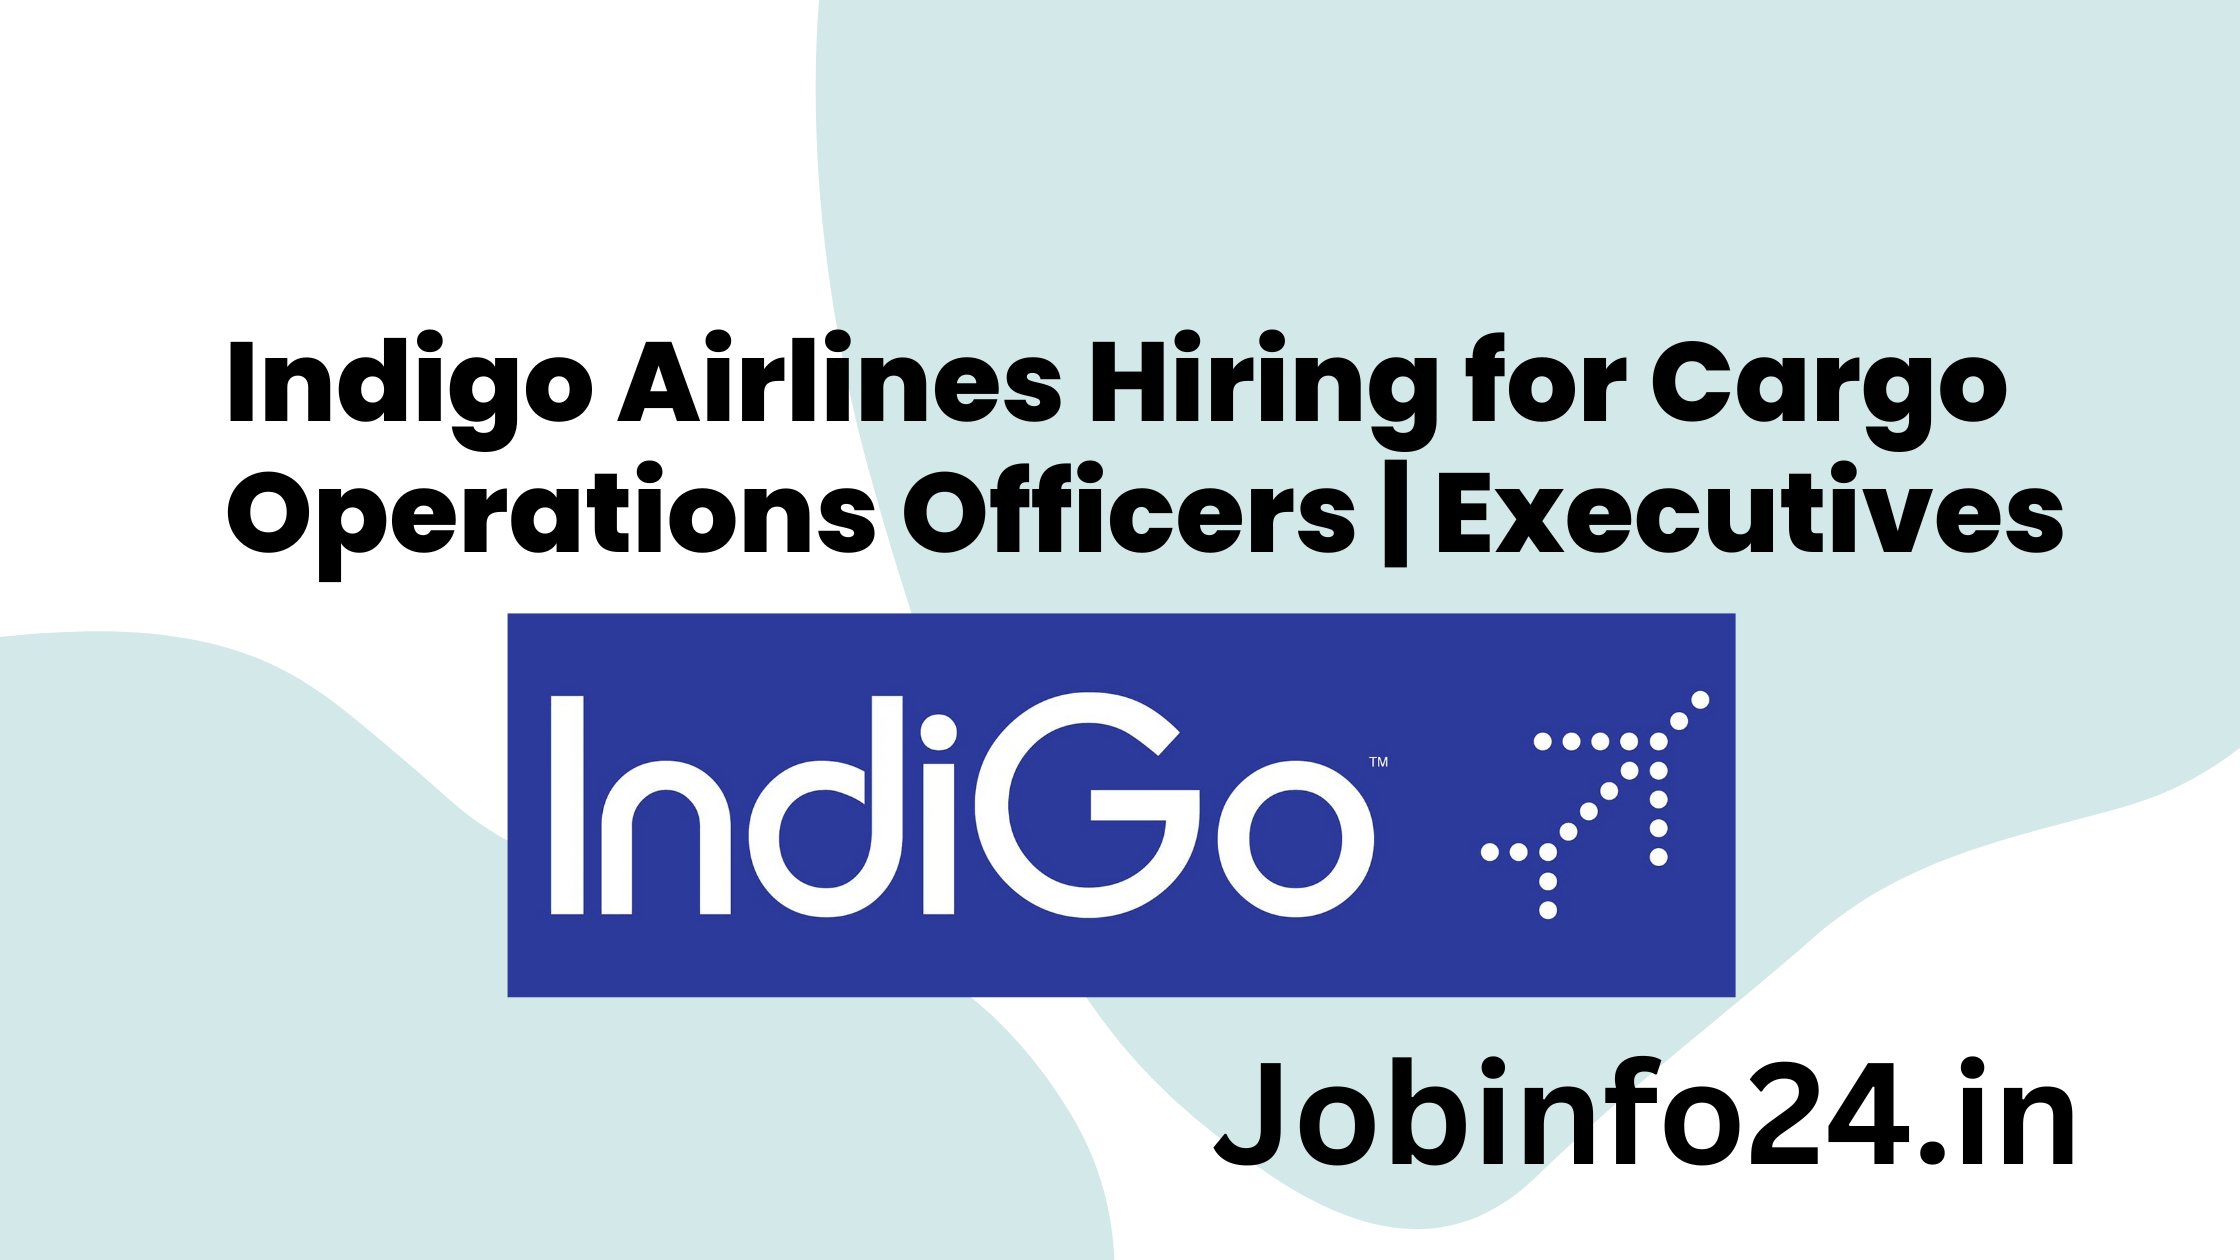 Indigo Airlines Hiring for Cargo Operations Officers | Executives